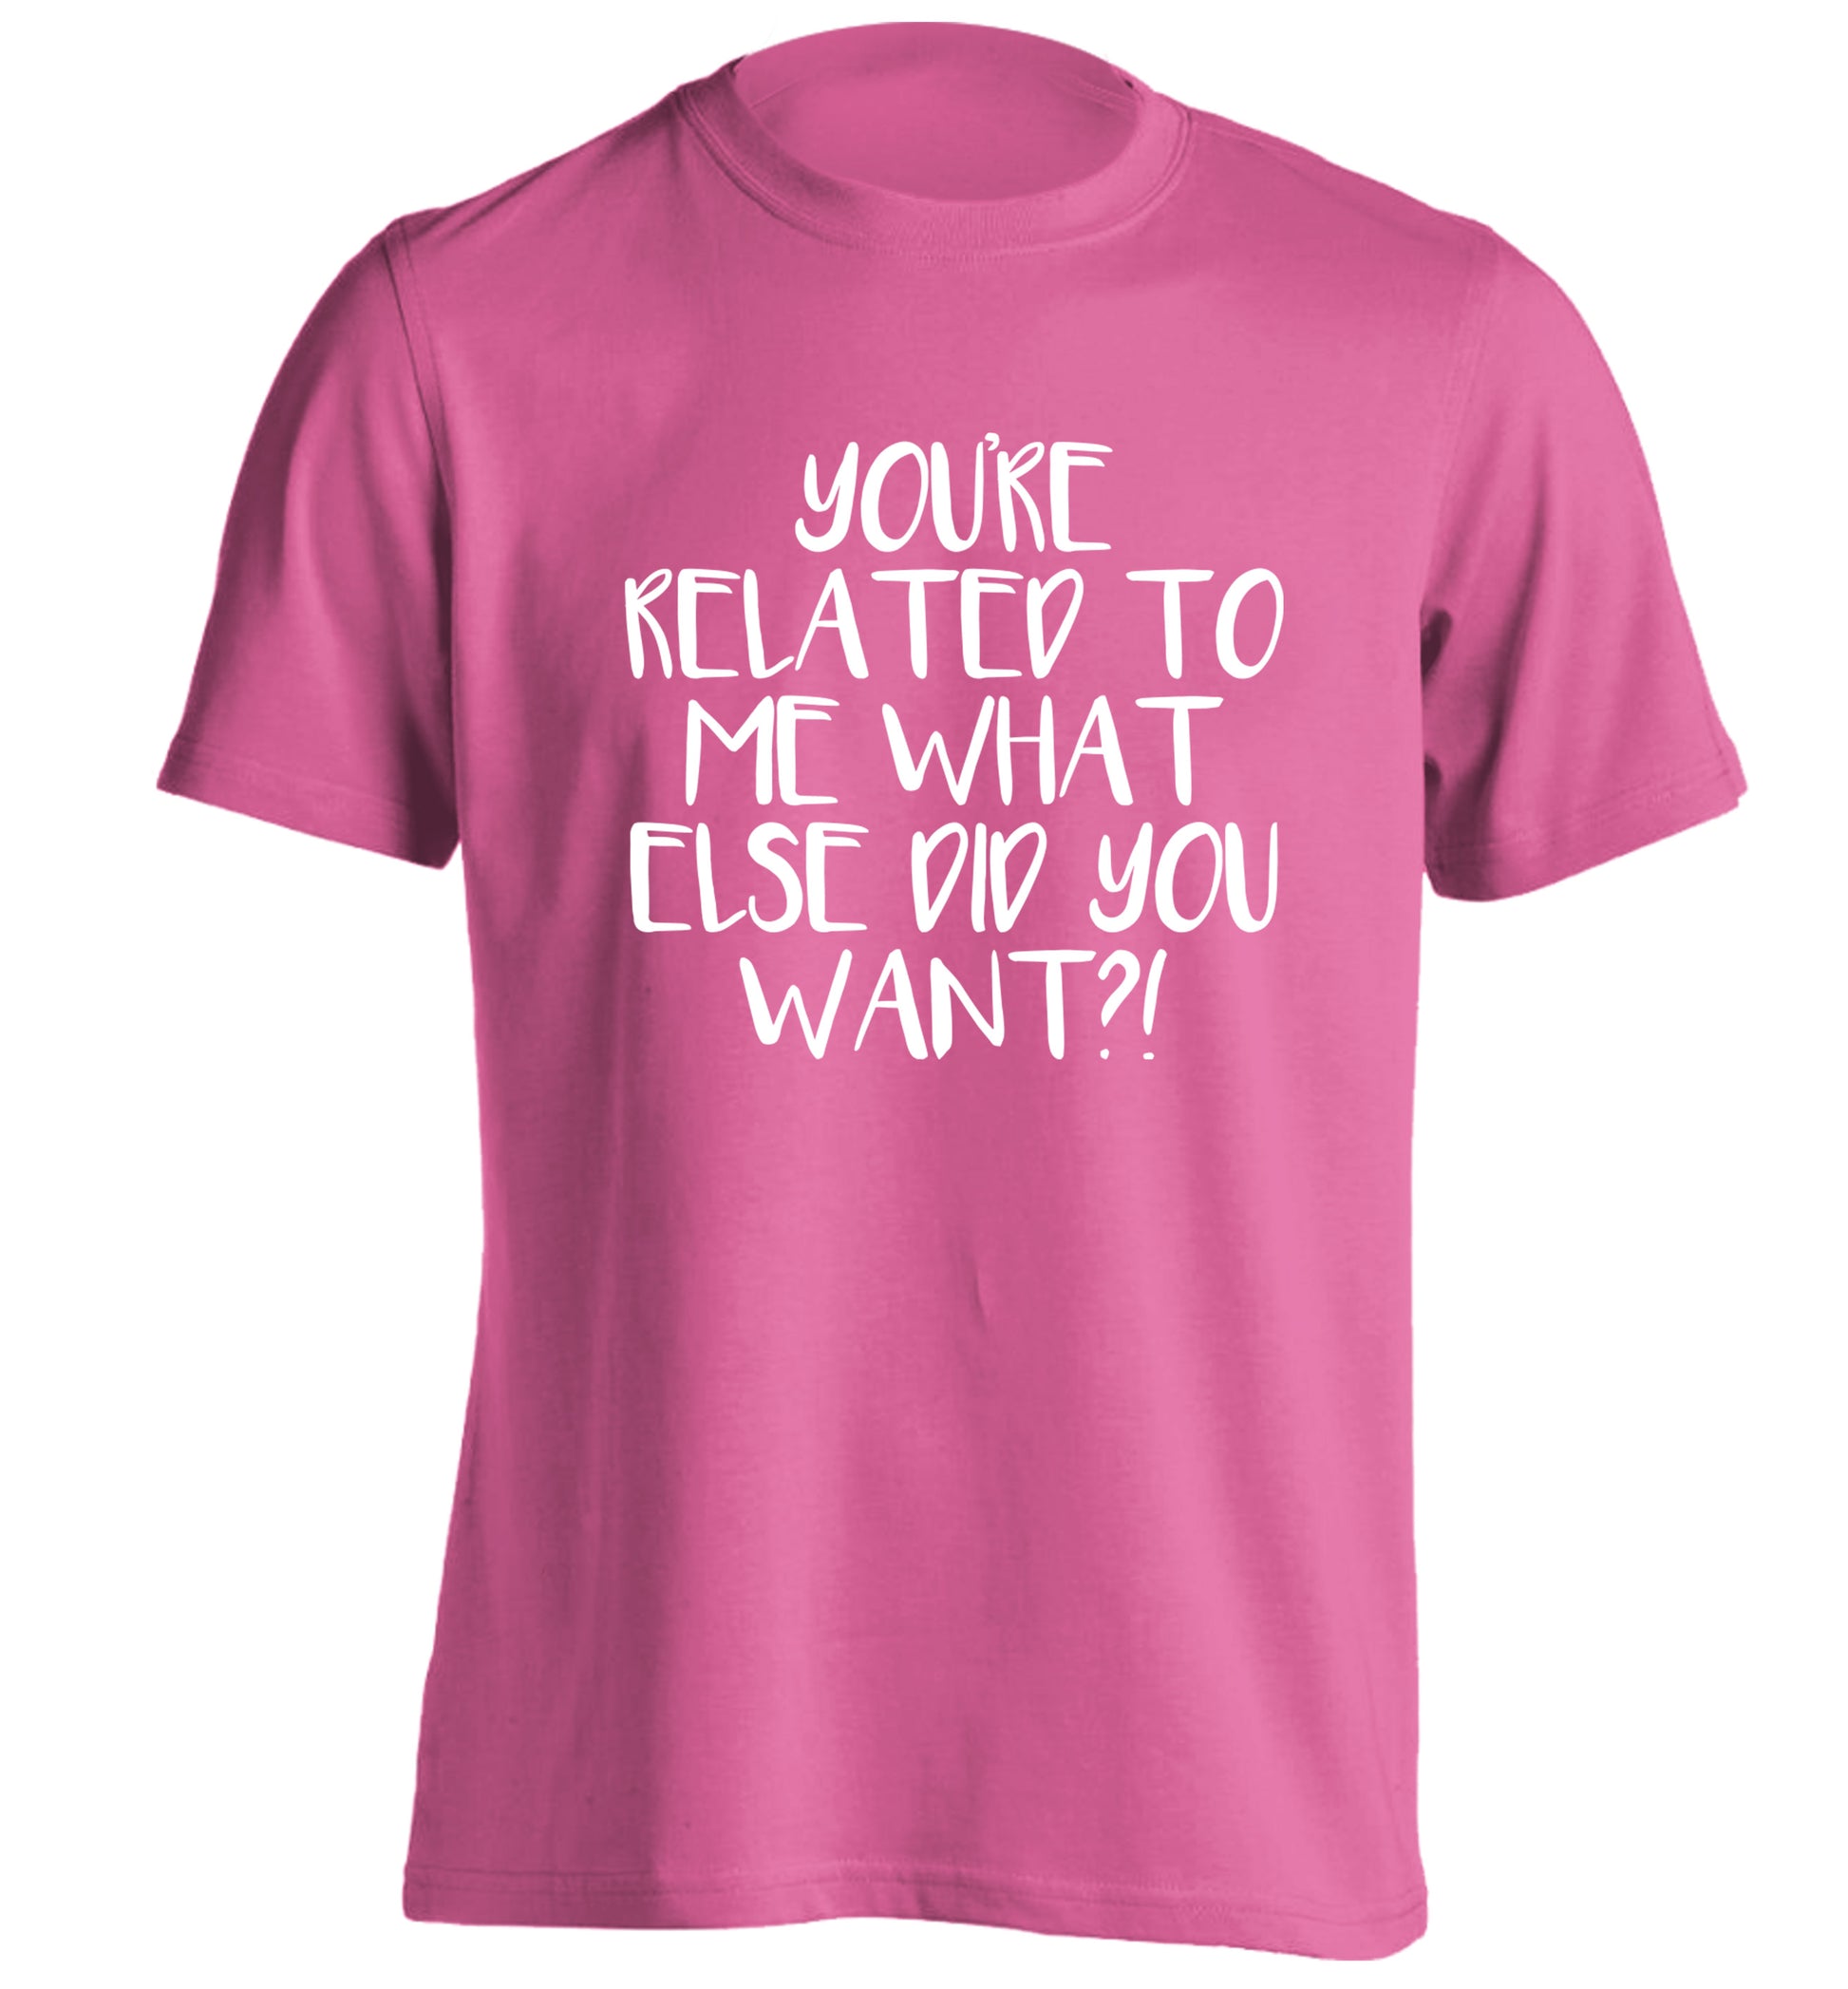 You're related to me what more do you want? adults unisex pink Tshirt 2XL